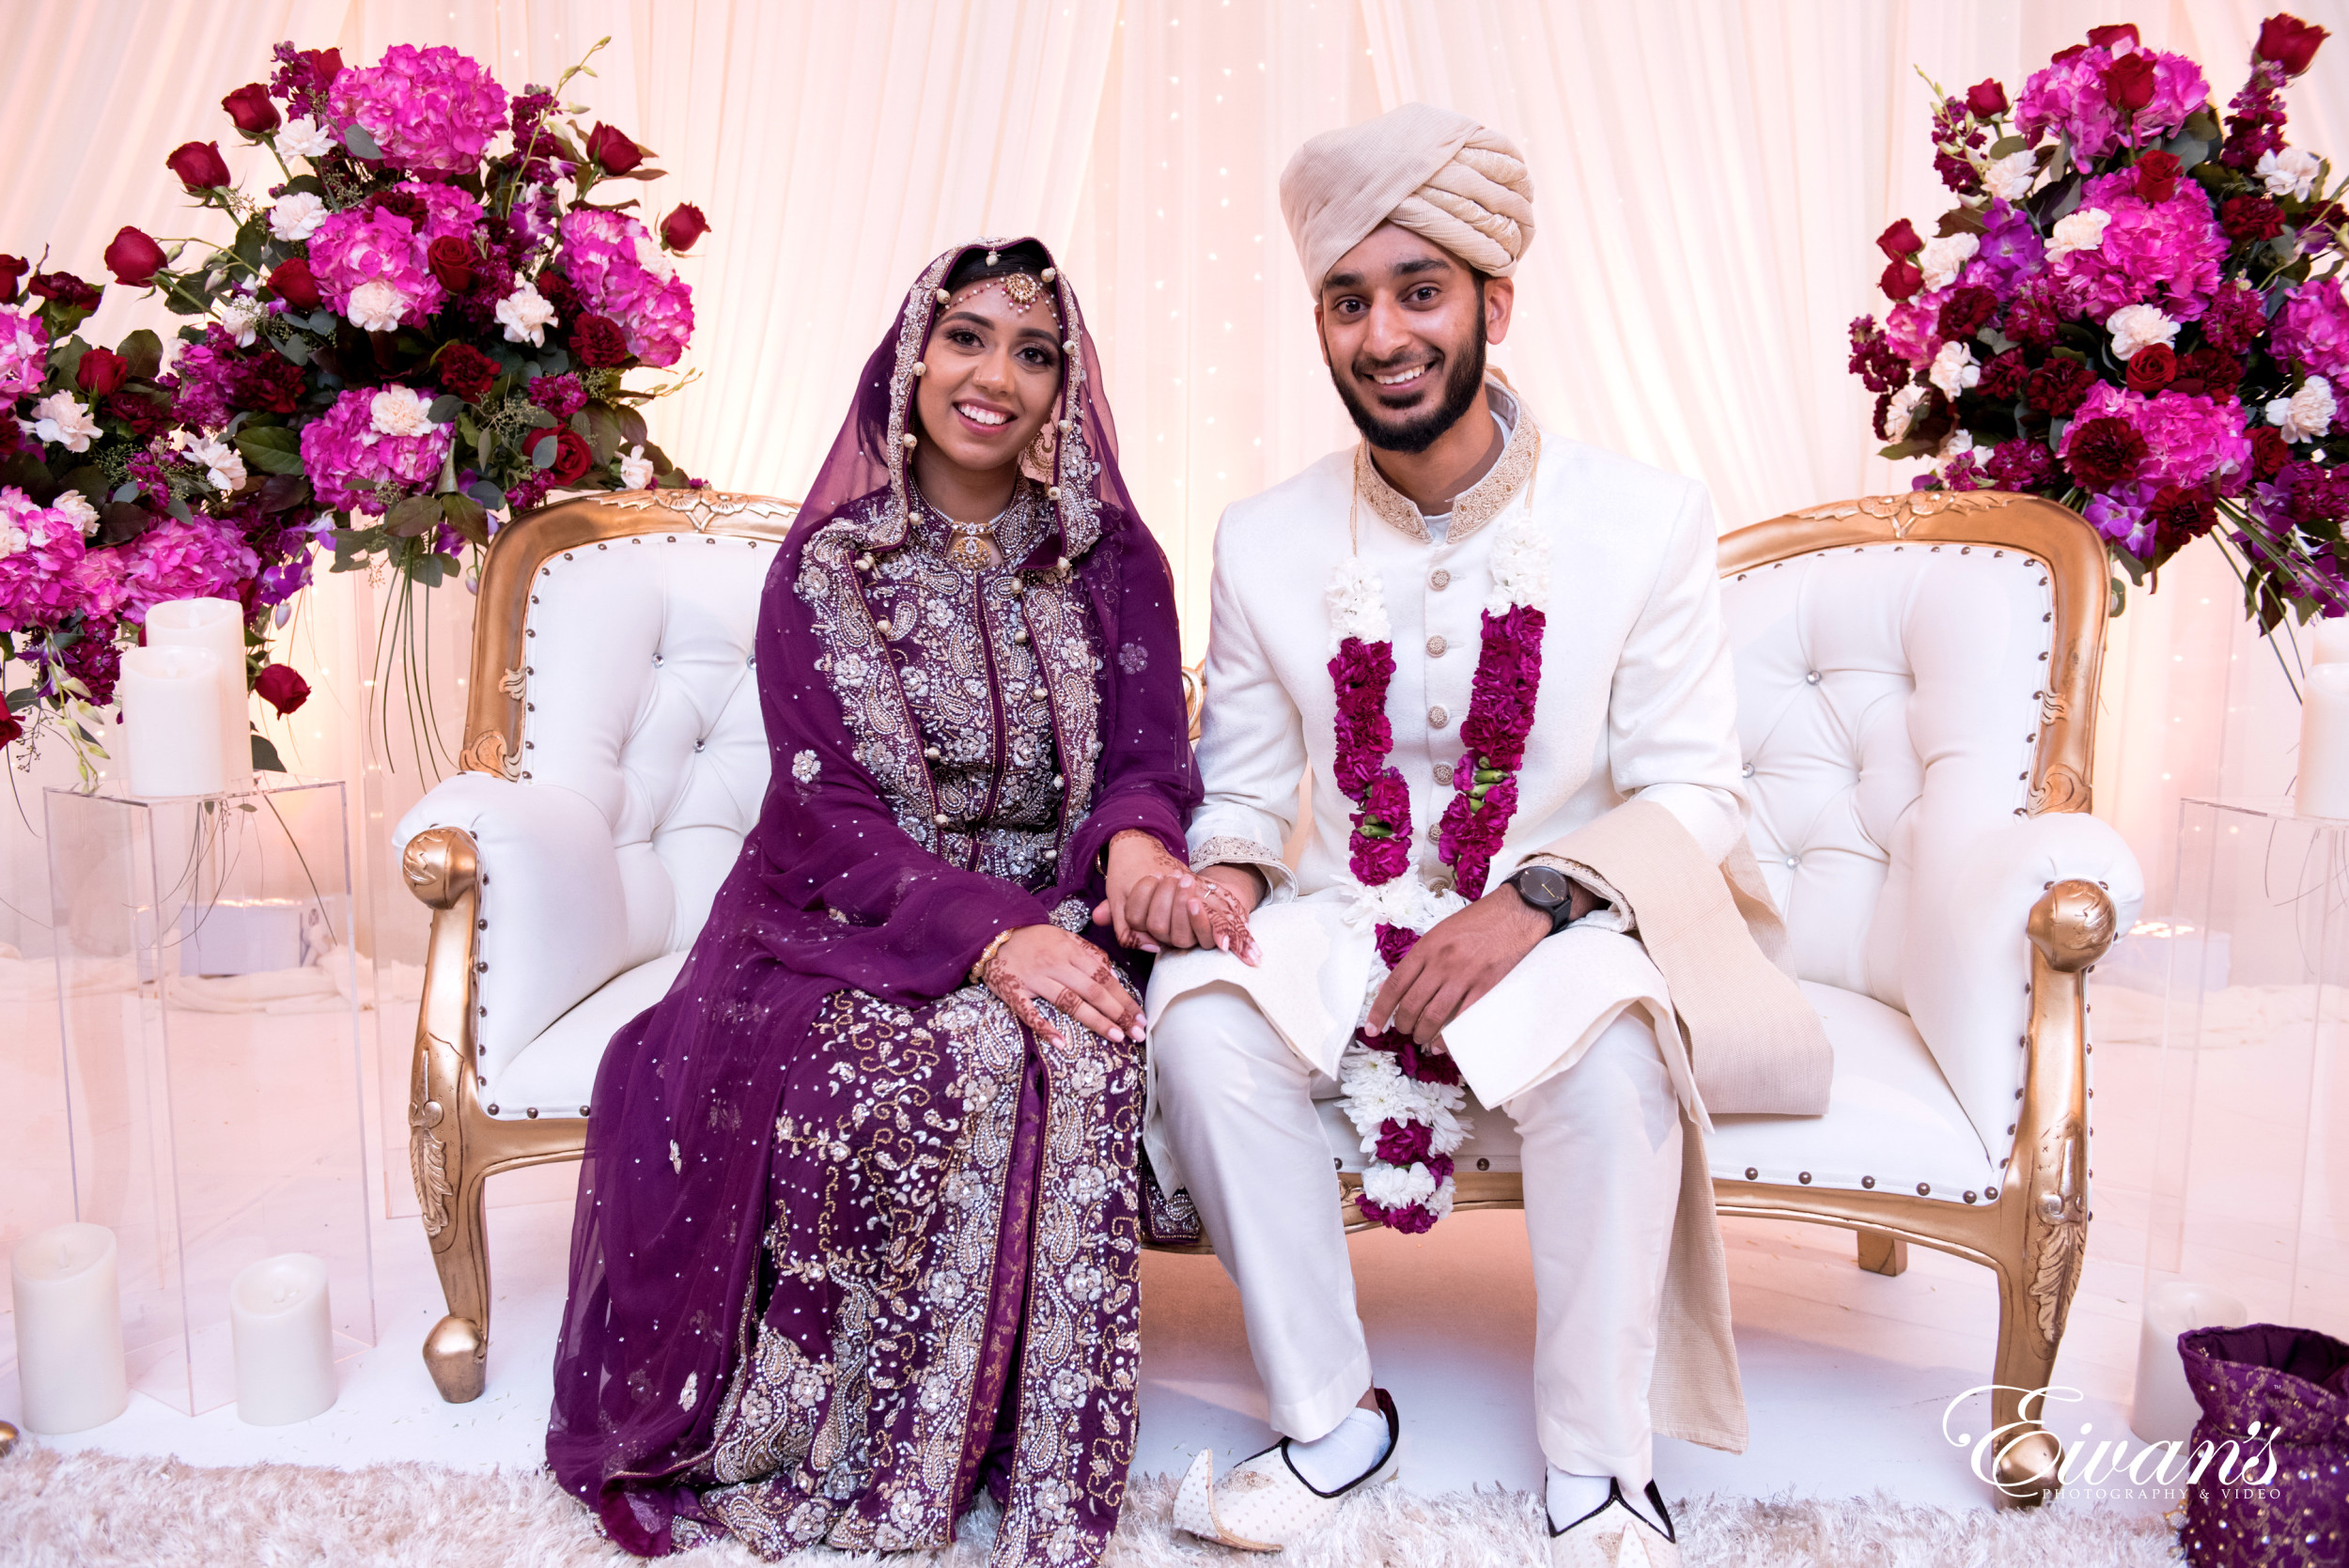 Bride and Groom Follow Parents' Wedding Tradition of Swapping Outfits